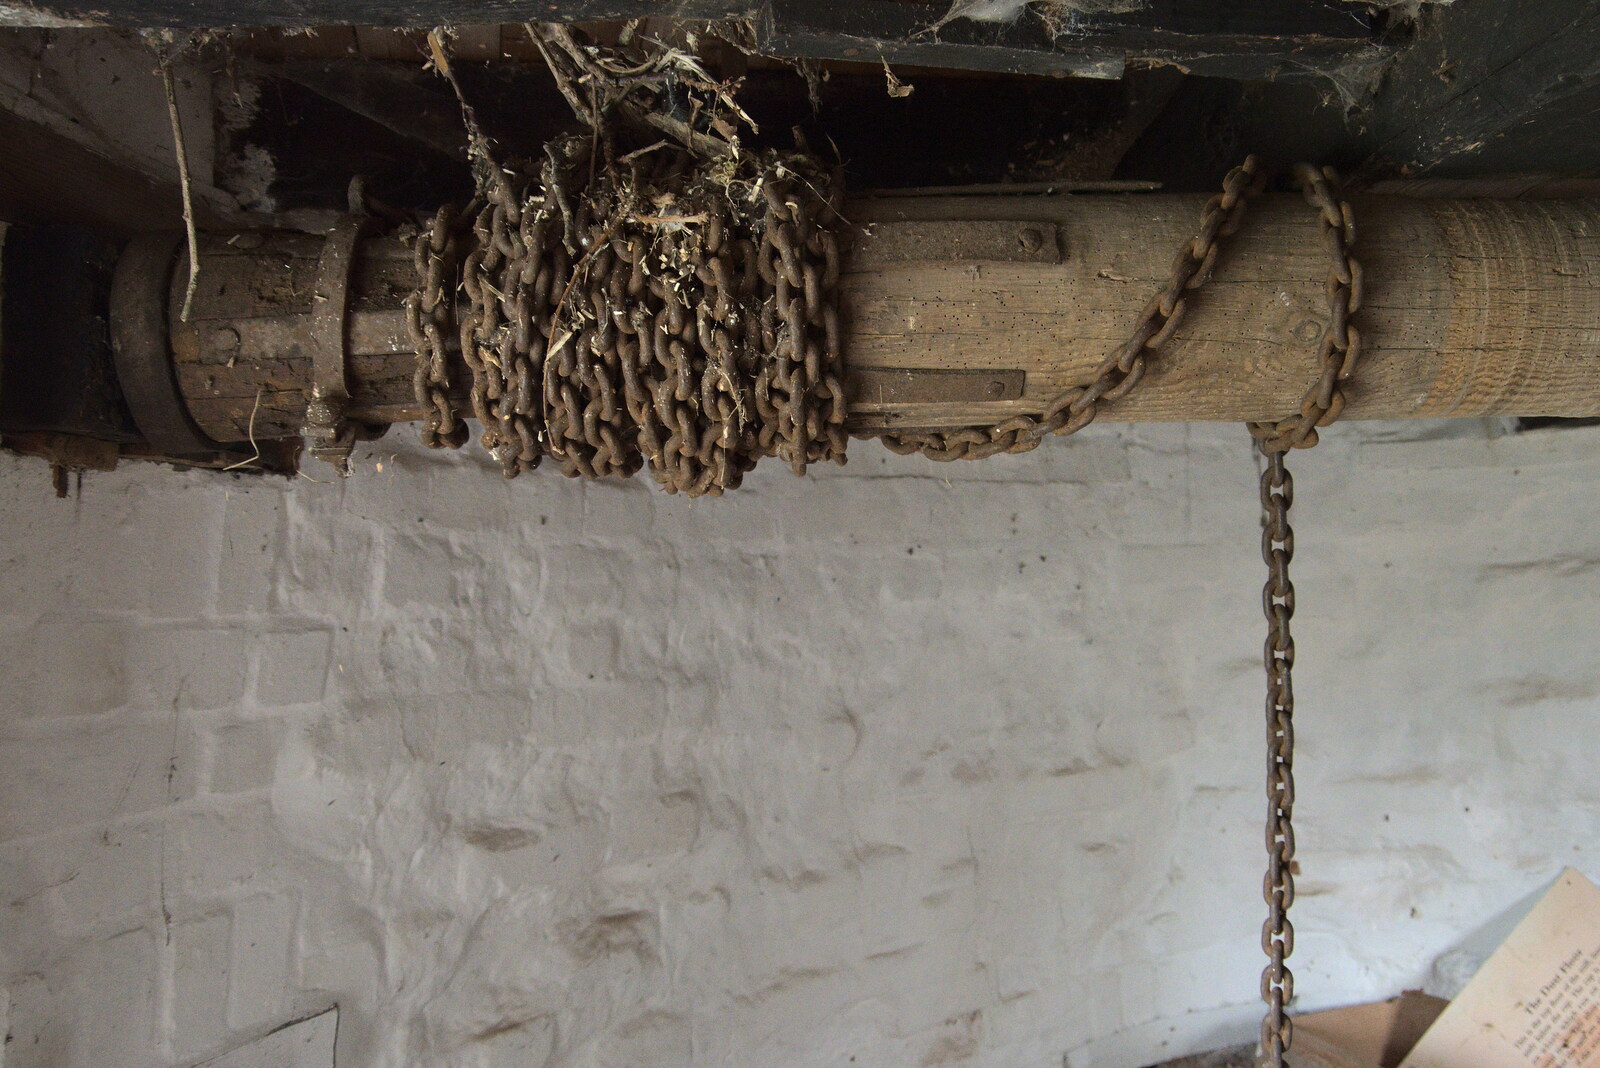 A load of wound-up chain from An Open Day at the Windmill, Billingford, Norfolk - 21st August 2021